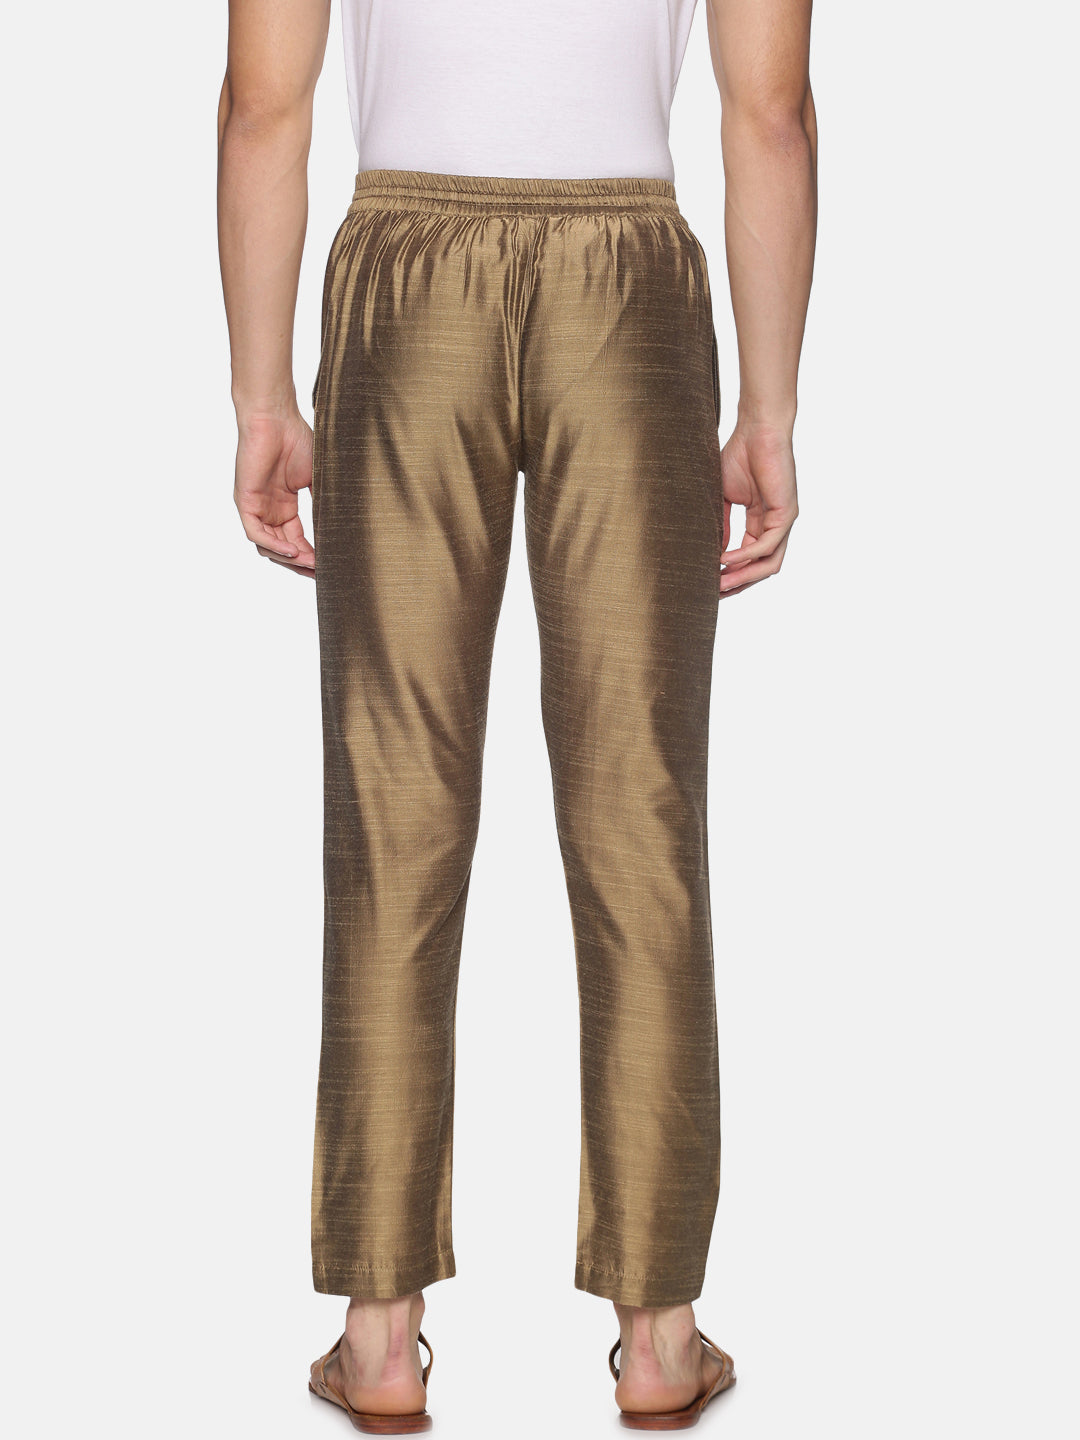 Pack of 2 Off White & Gold Art Silk Trousers with Drawstring